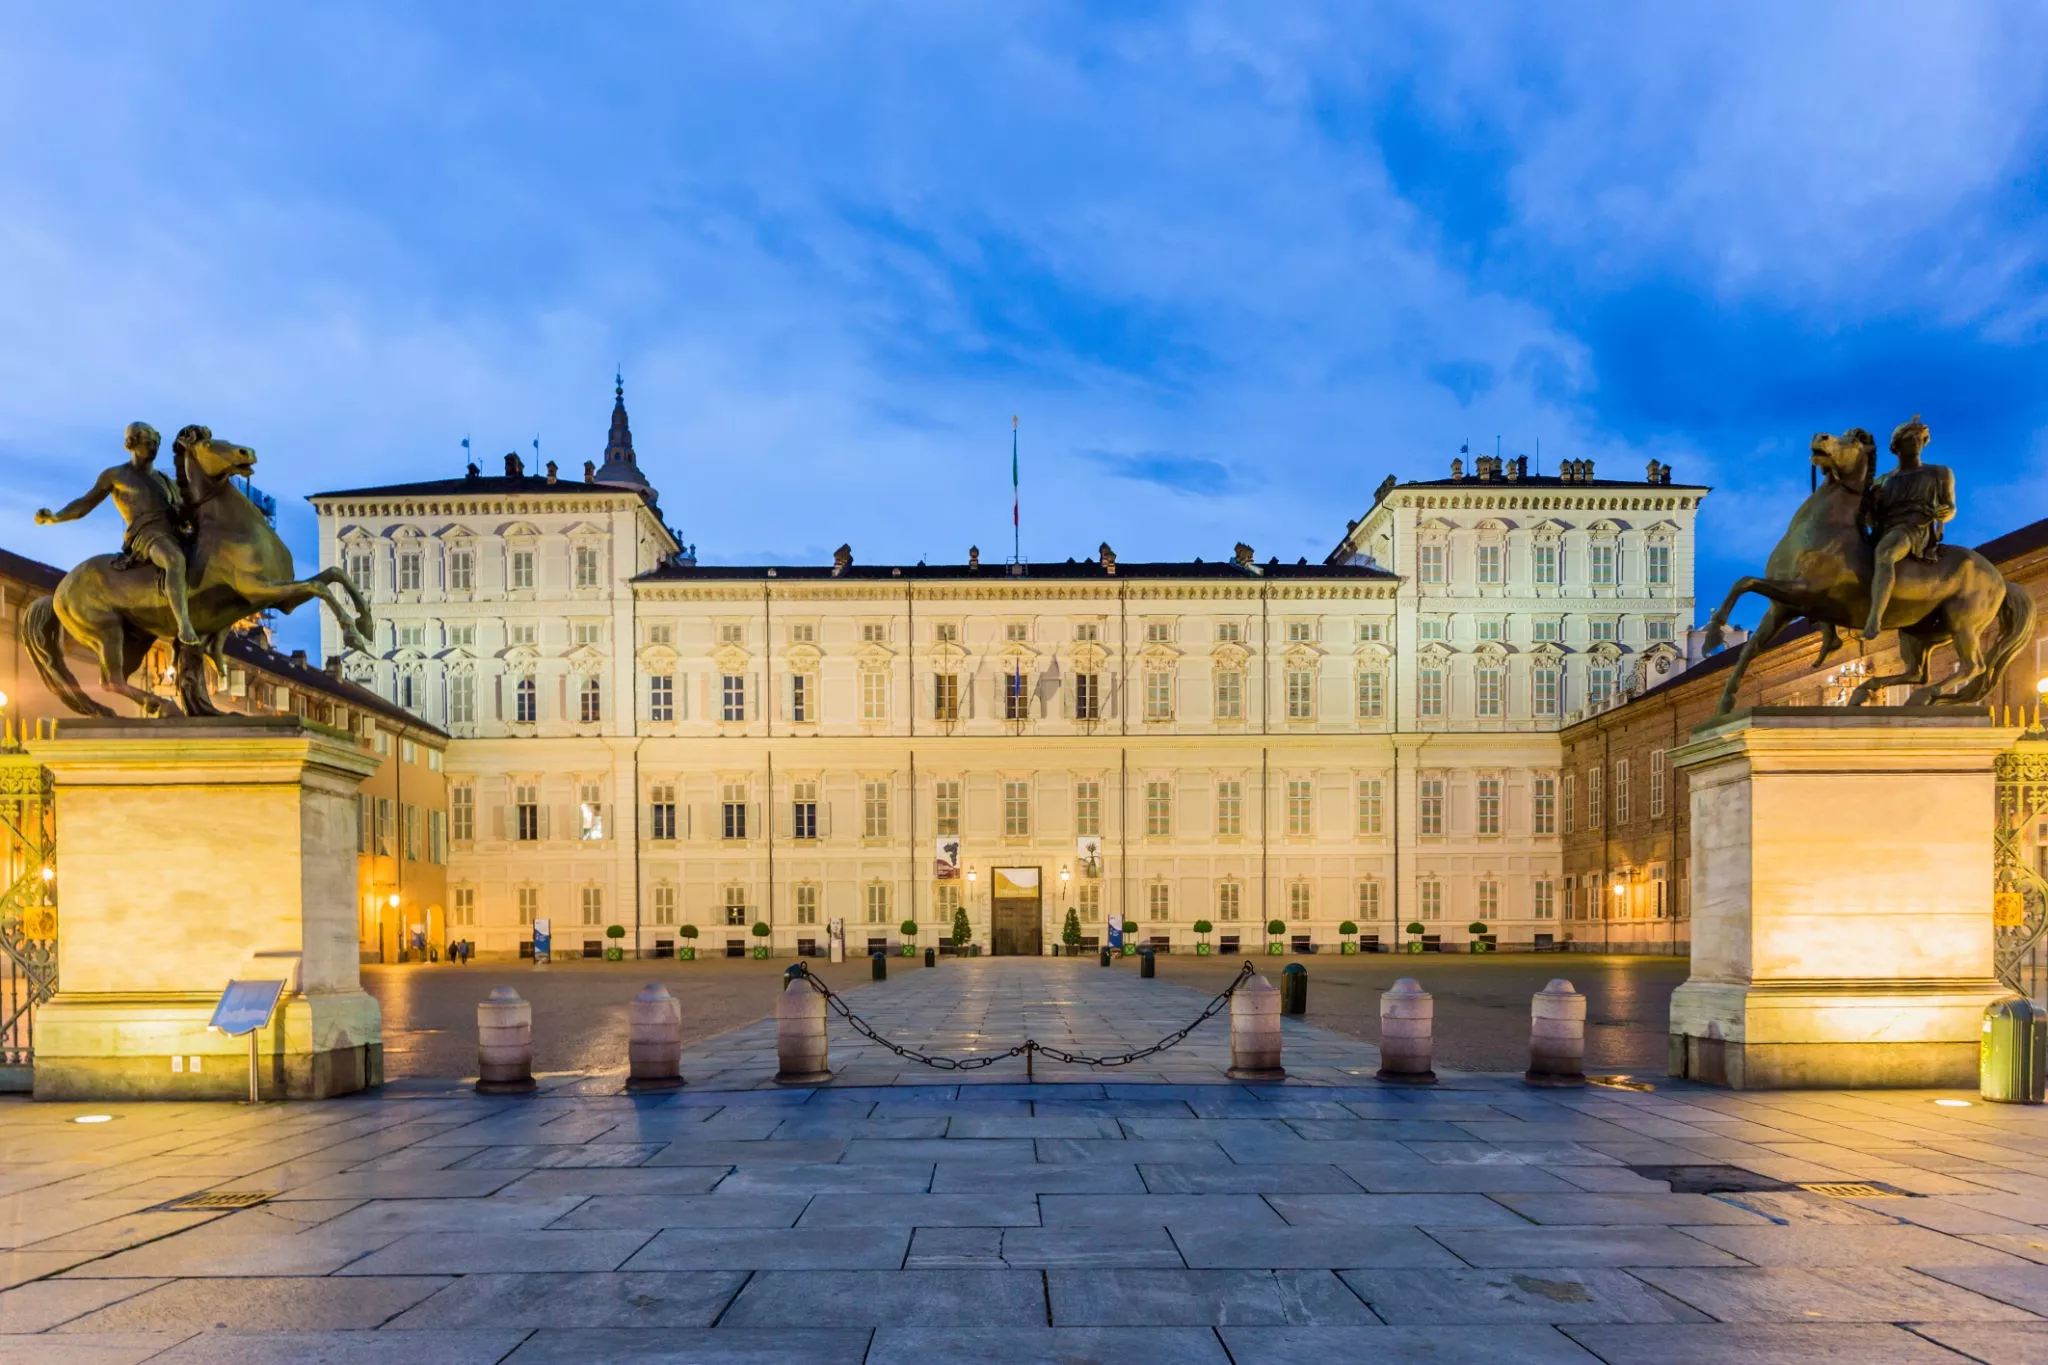 Royal Palace in Turin in Italy, Europe | Architecture - Rated 3.7